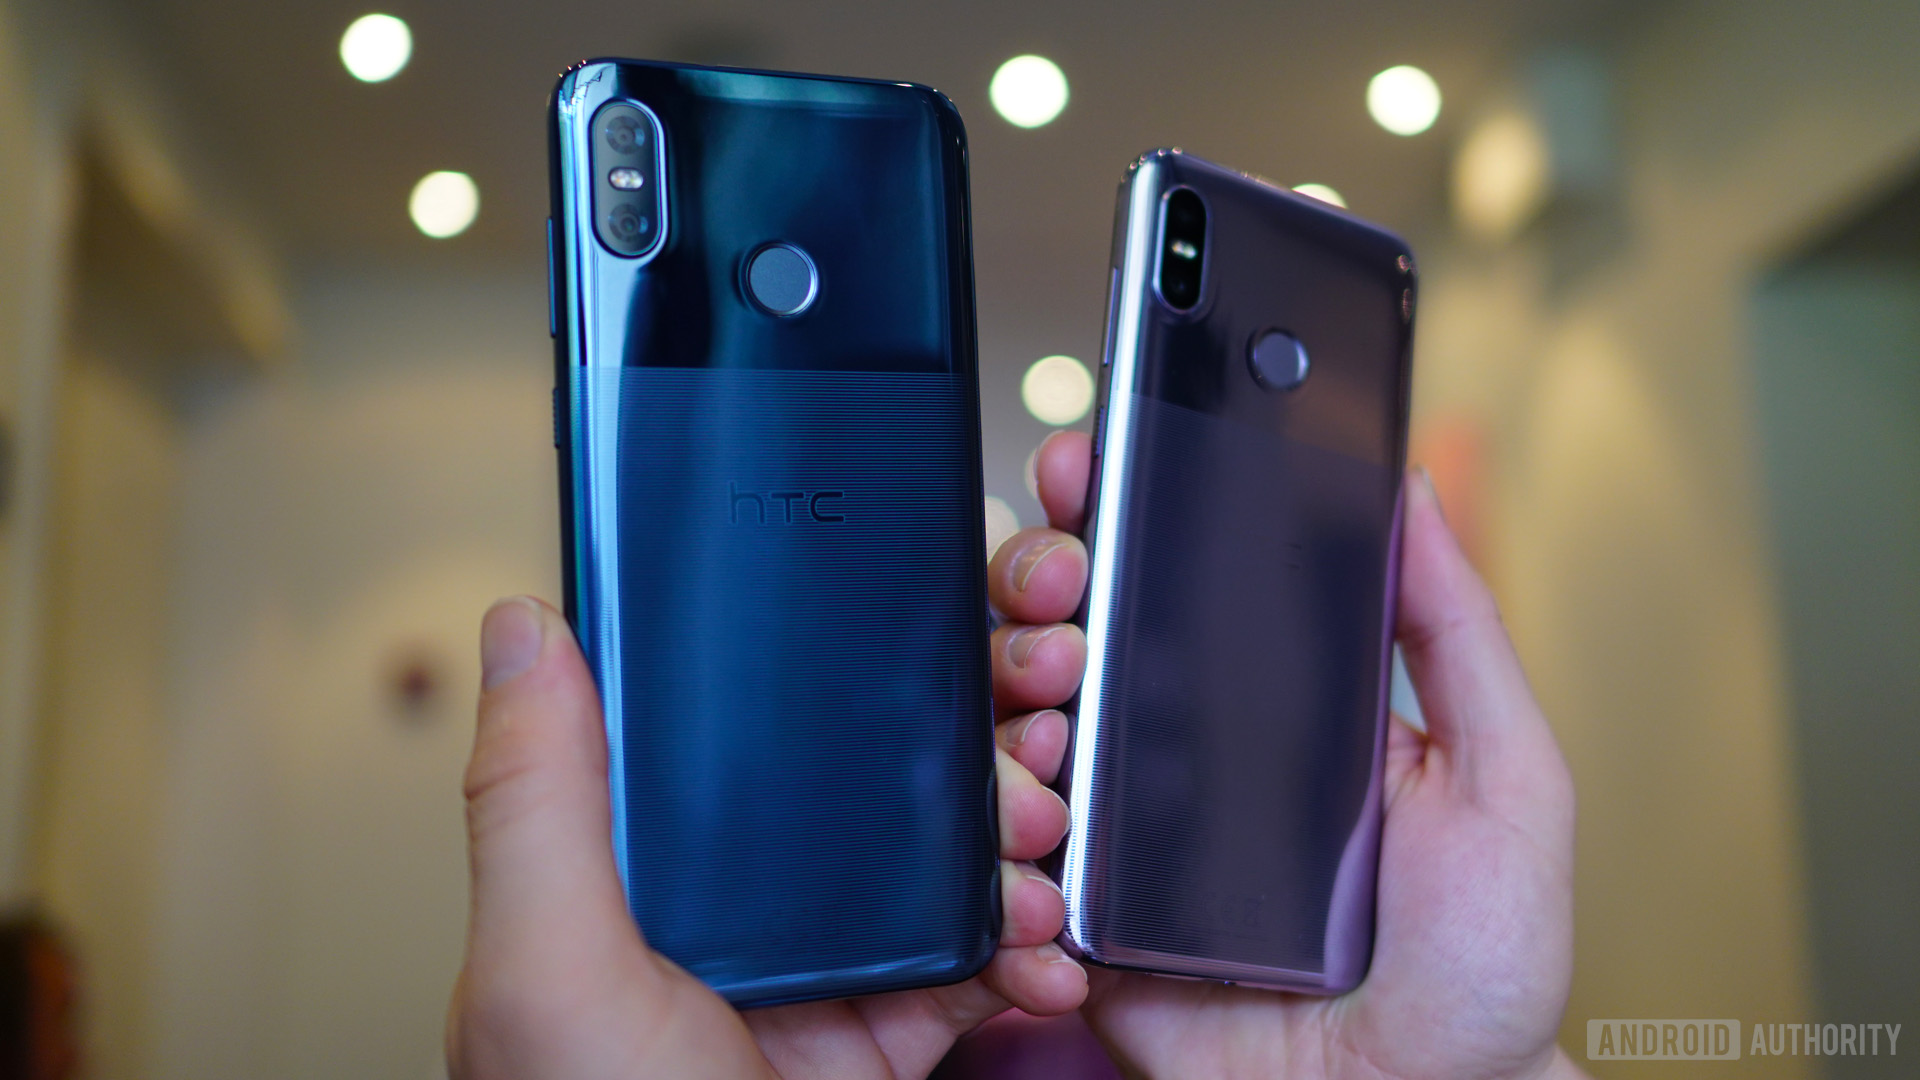 HTC U12 Life Moonlight Blue and Twilight Purple colors - How to take screenshots on Android